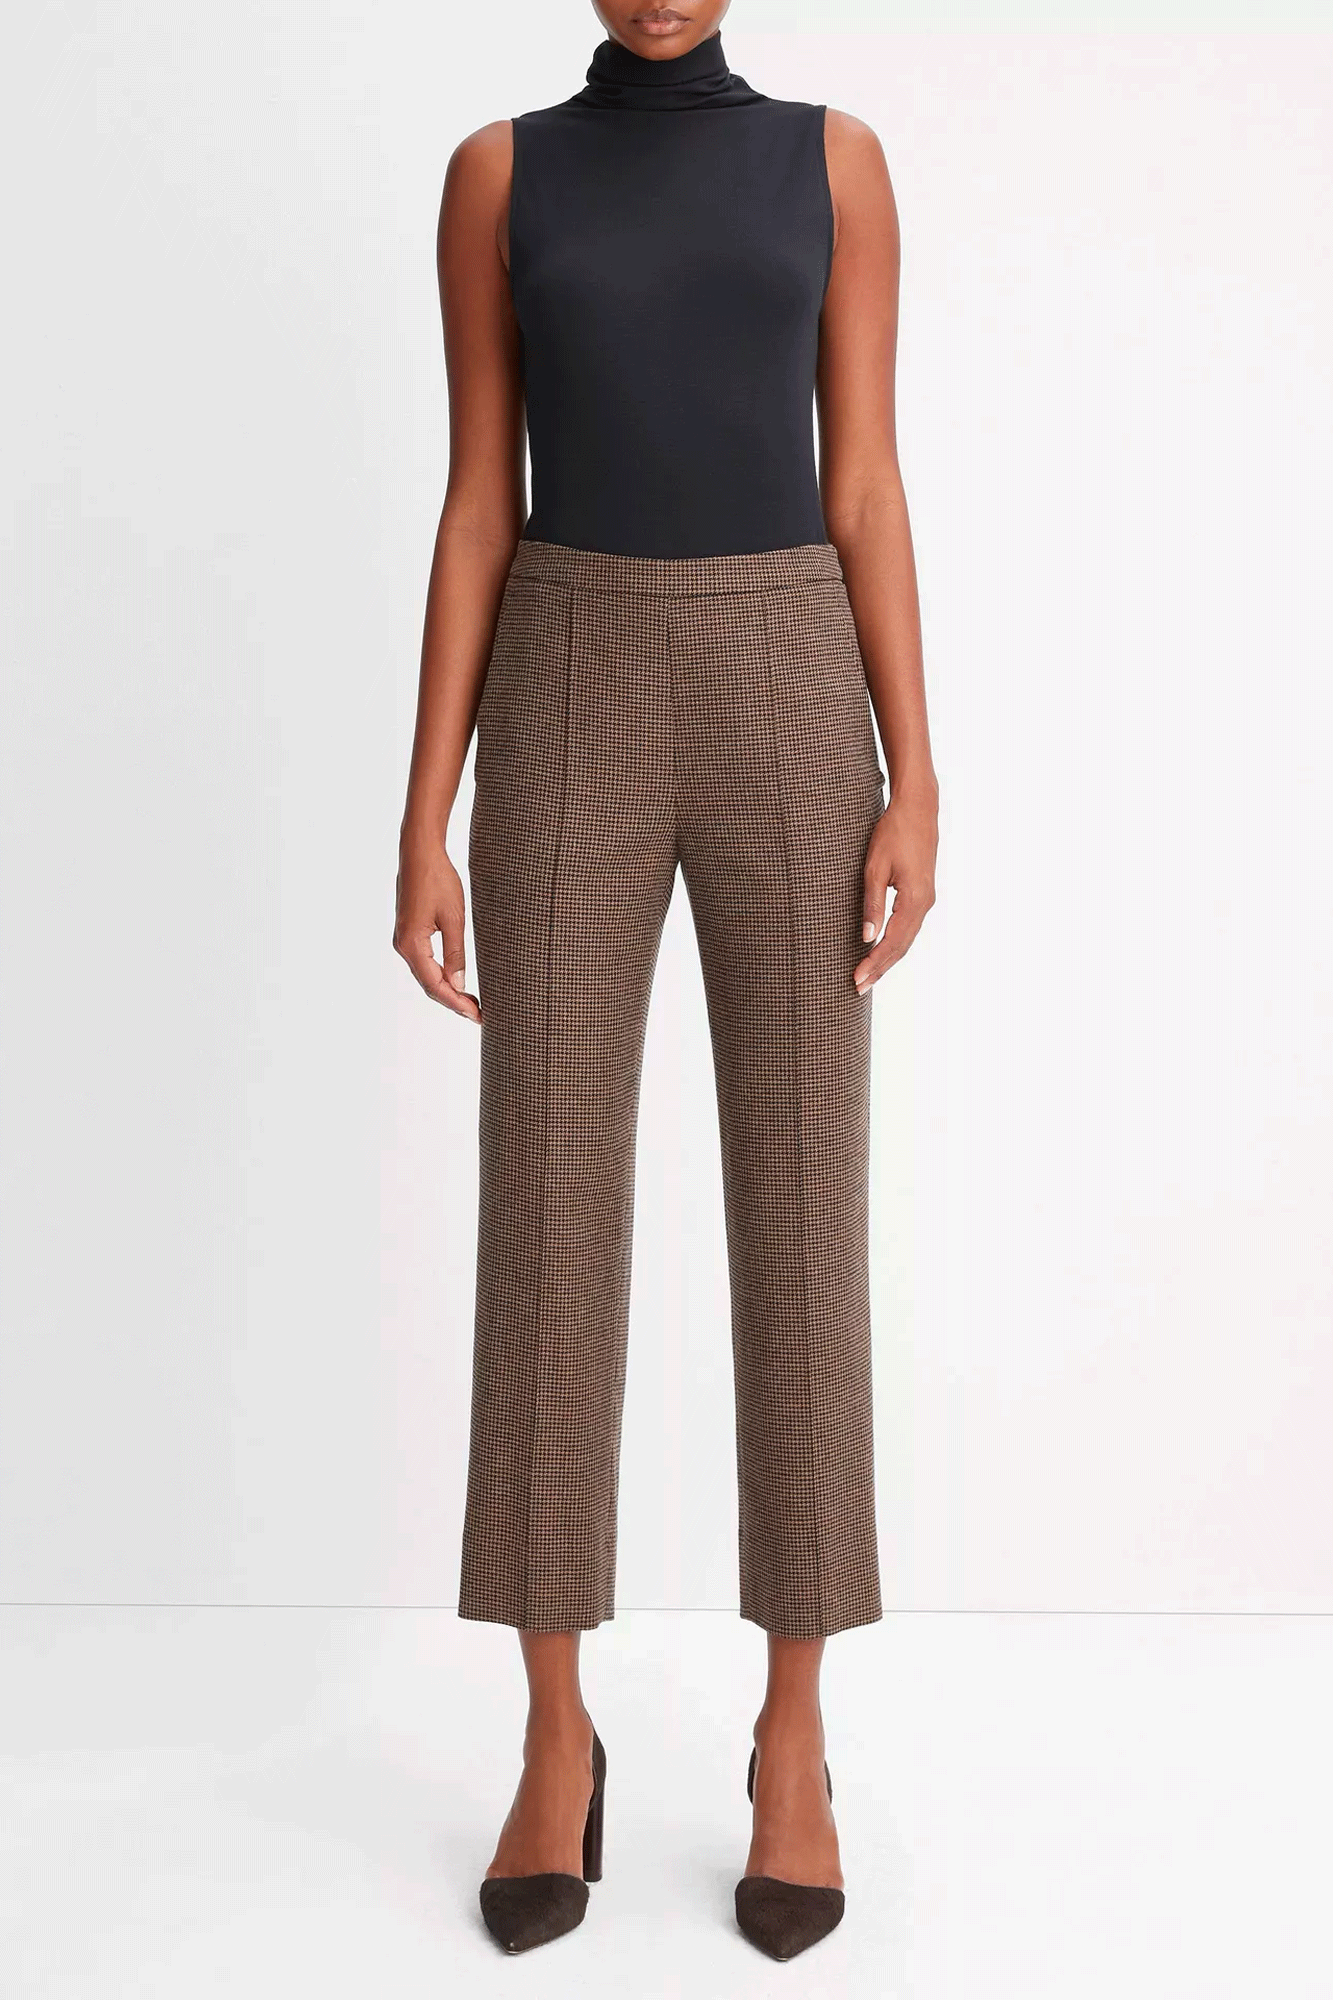 Elevate your style this season with our Houndstooth Mid Rise Pull On Pant. Crafted from a comfortable blend of materials, this pant features a mid-rise design with a discreet elastic back waistband. An all-over houndstooth motif and stitch-creased legs exude elegance and add a polished finish to any look.